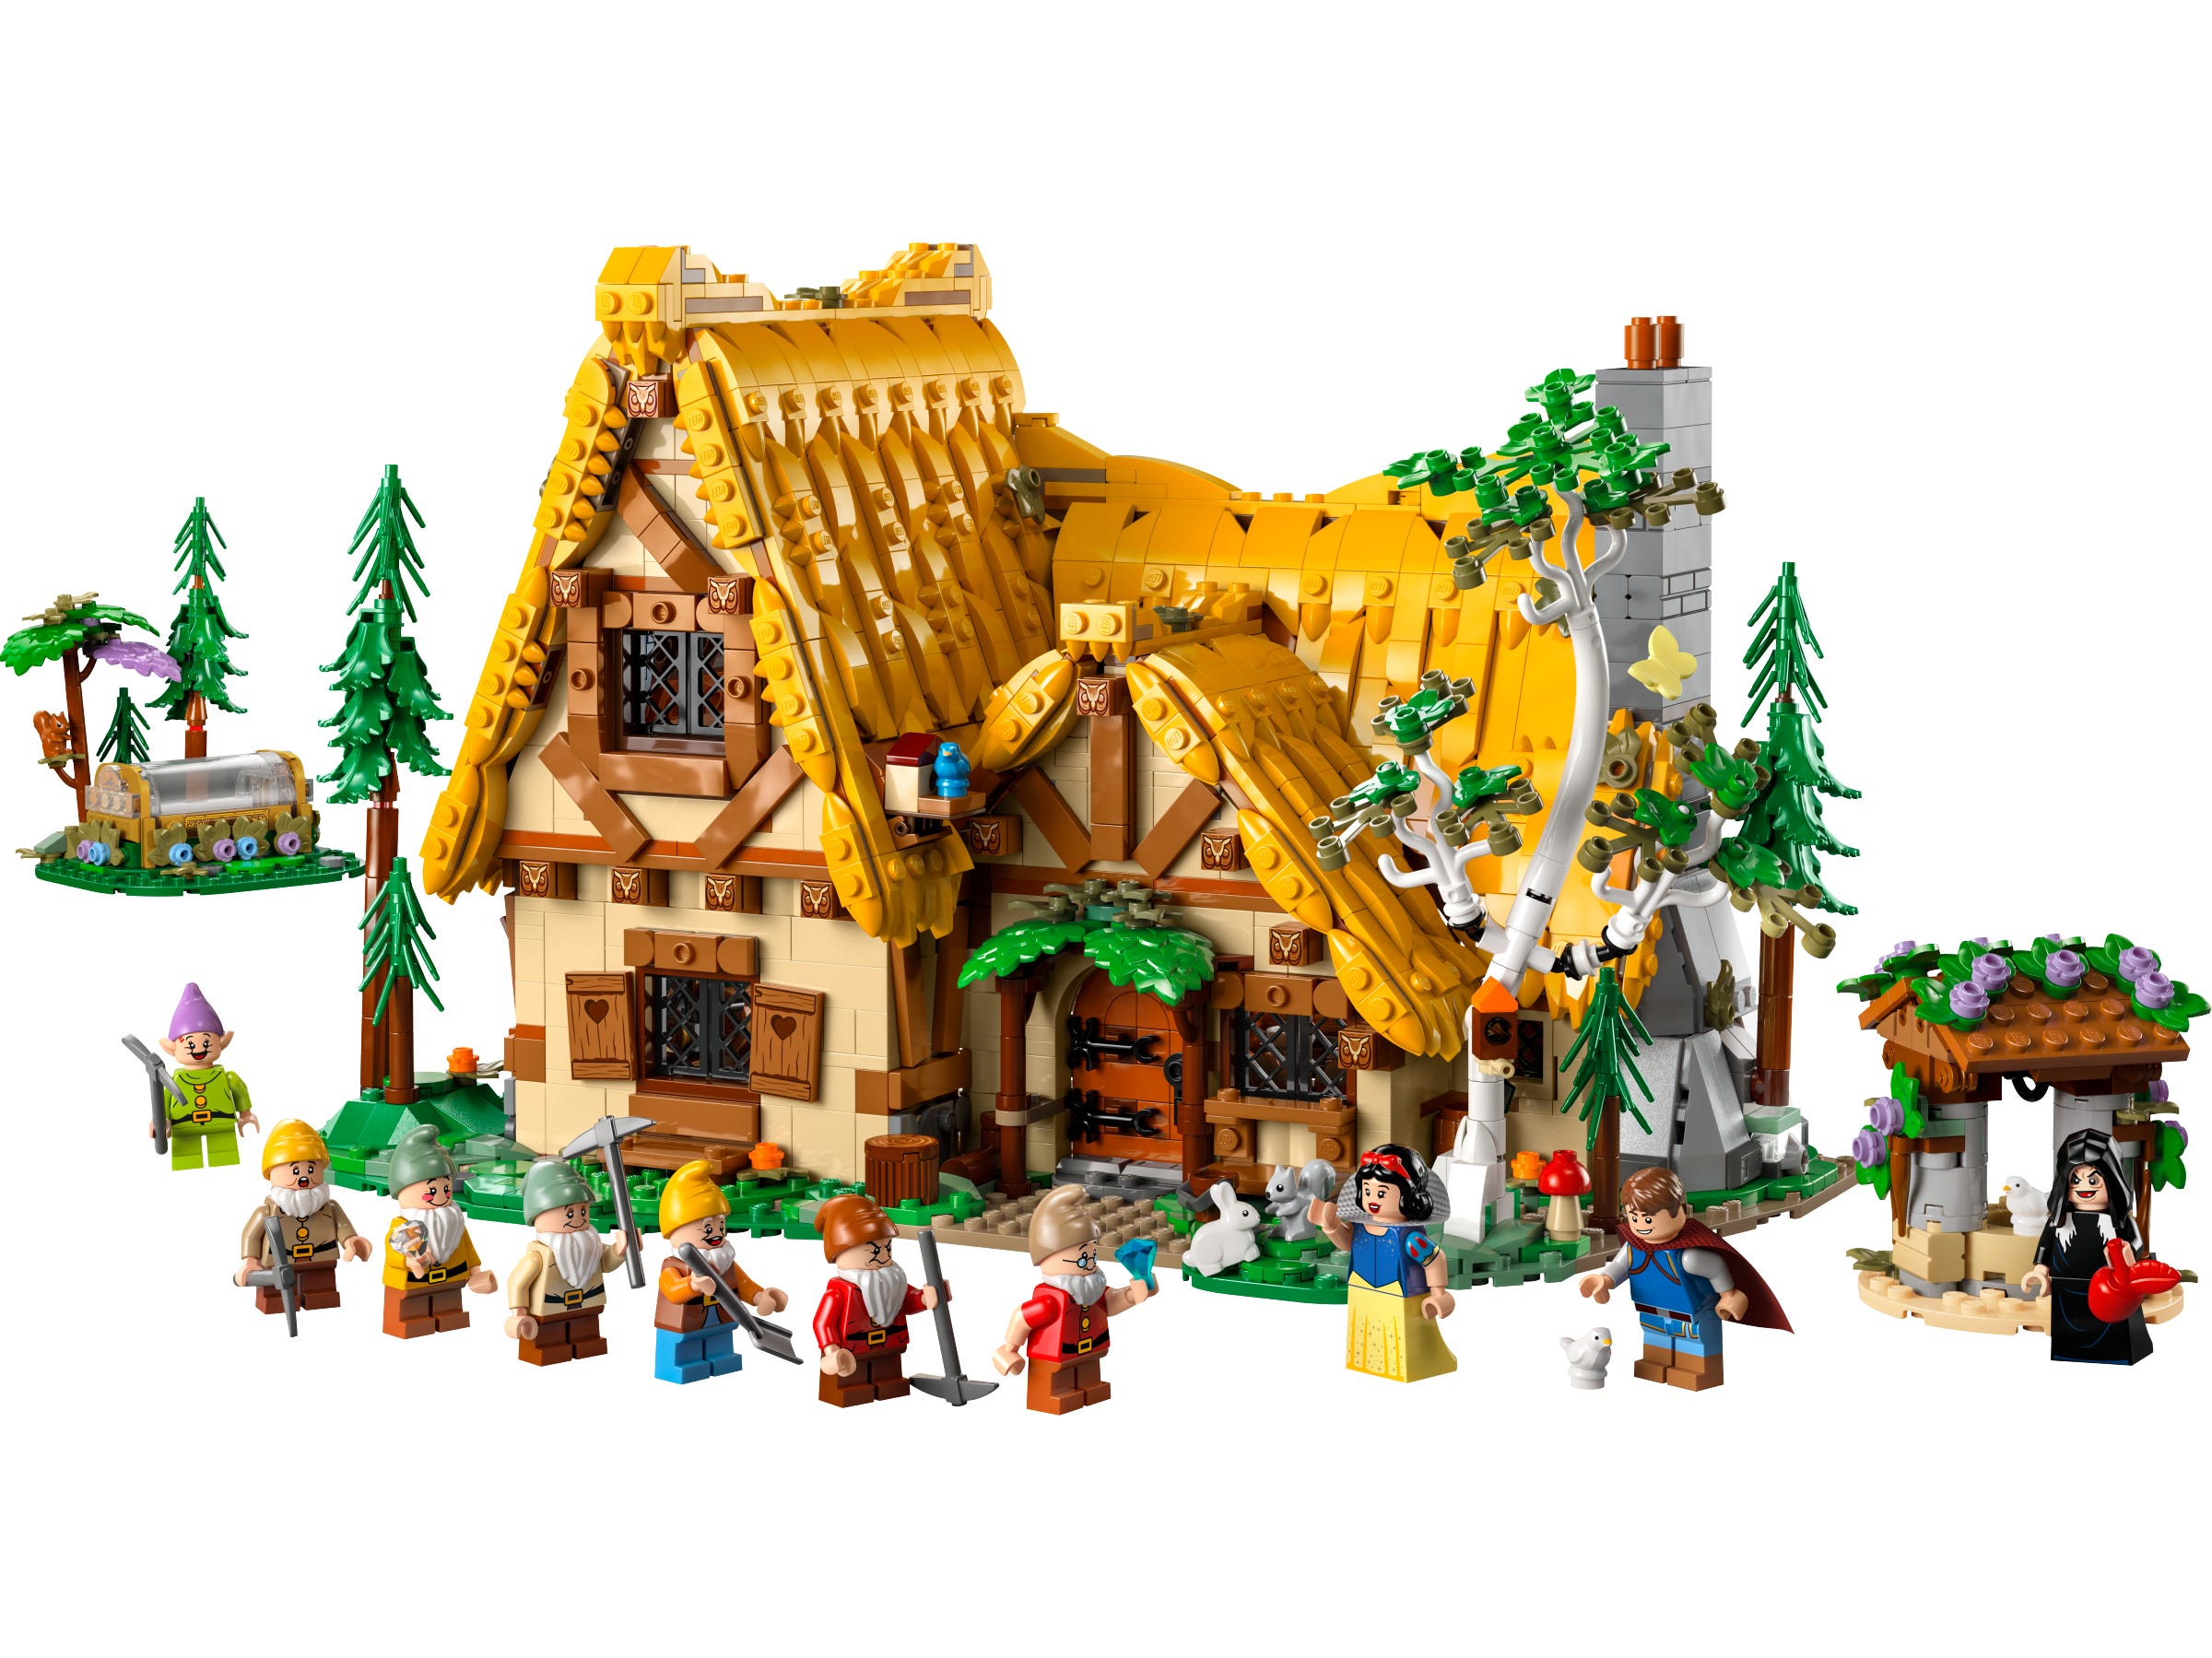 Snow White and the Seven Dwarfs' Cottage